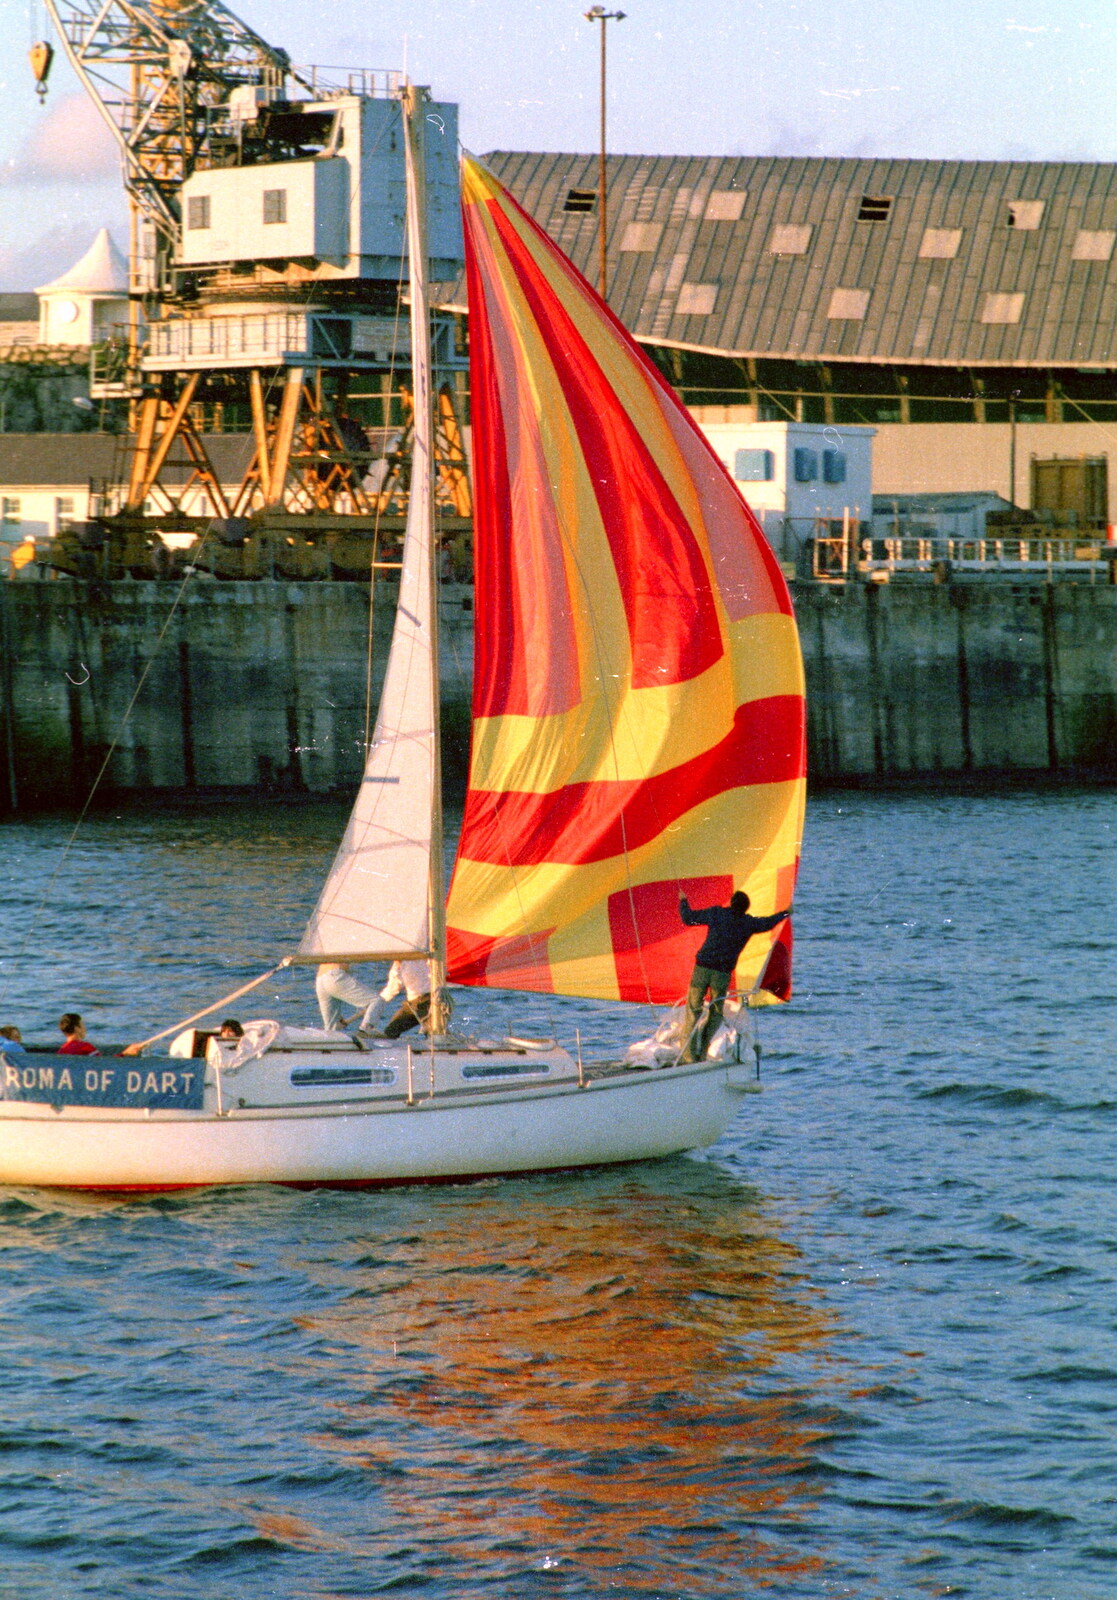 The 'Roma of Dart' yacht from Uni: A Student Booze Cruise, Plymouth Sound, Devon - 2nd May 1986